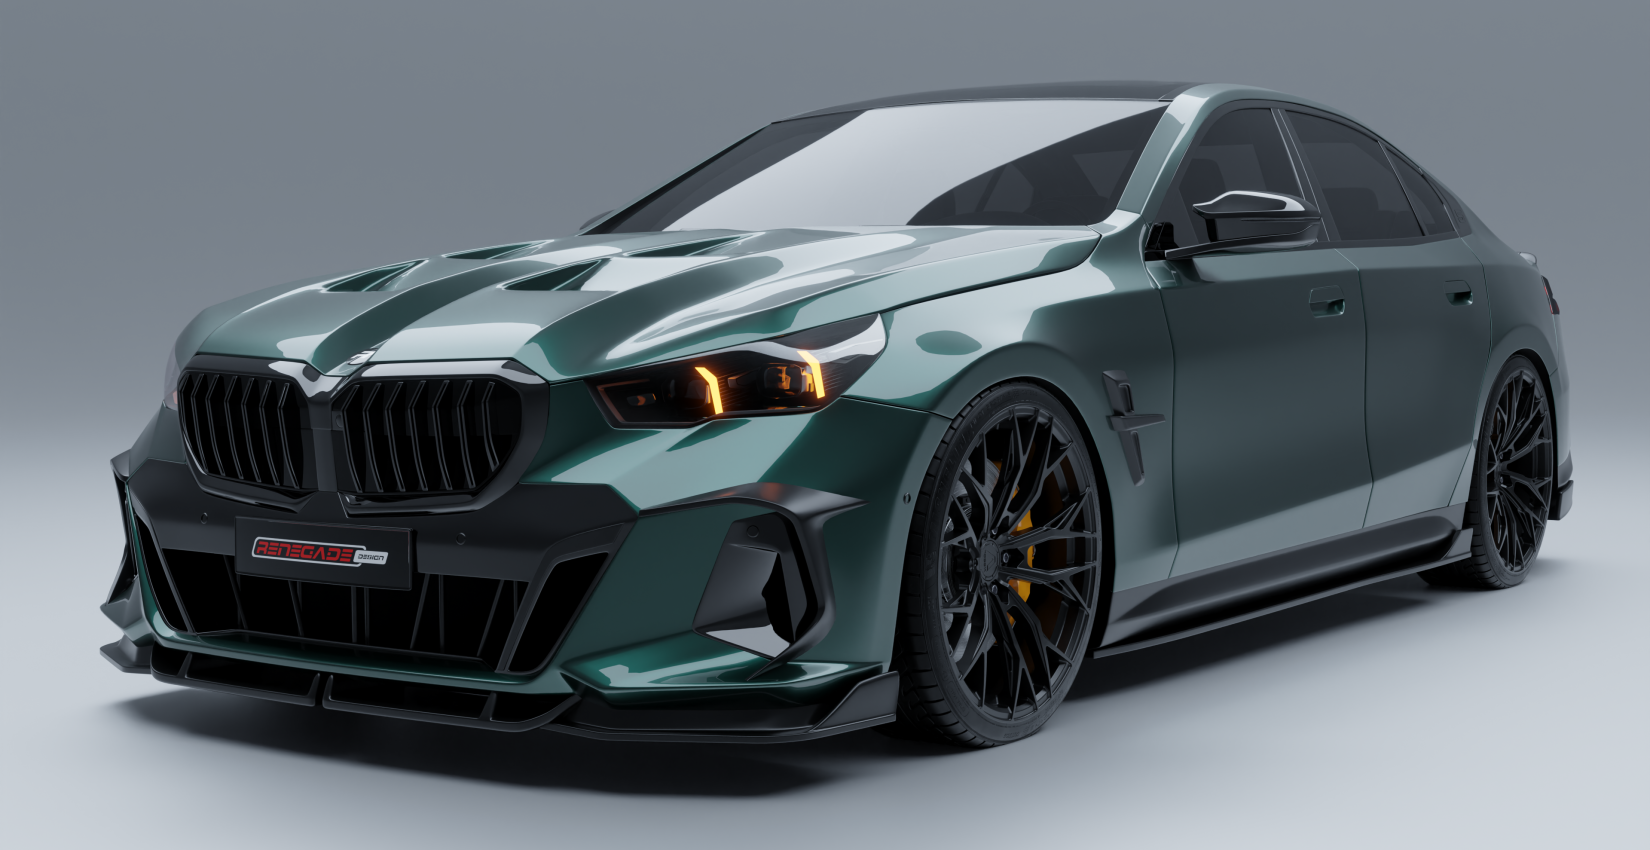 New BMW 5 Series G60 Exclusive Body Kit by Renegade Design